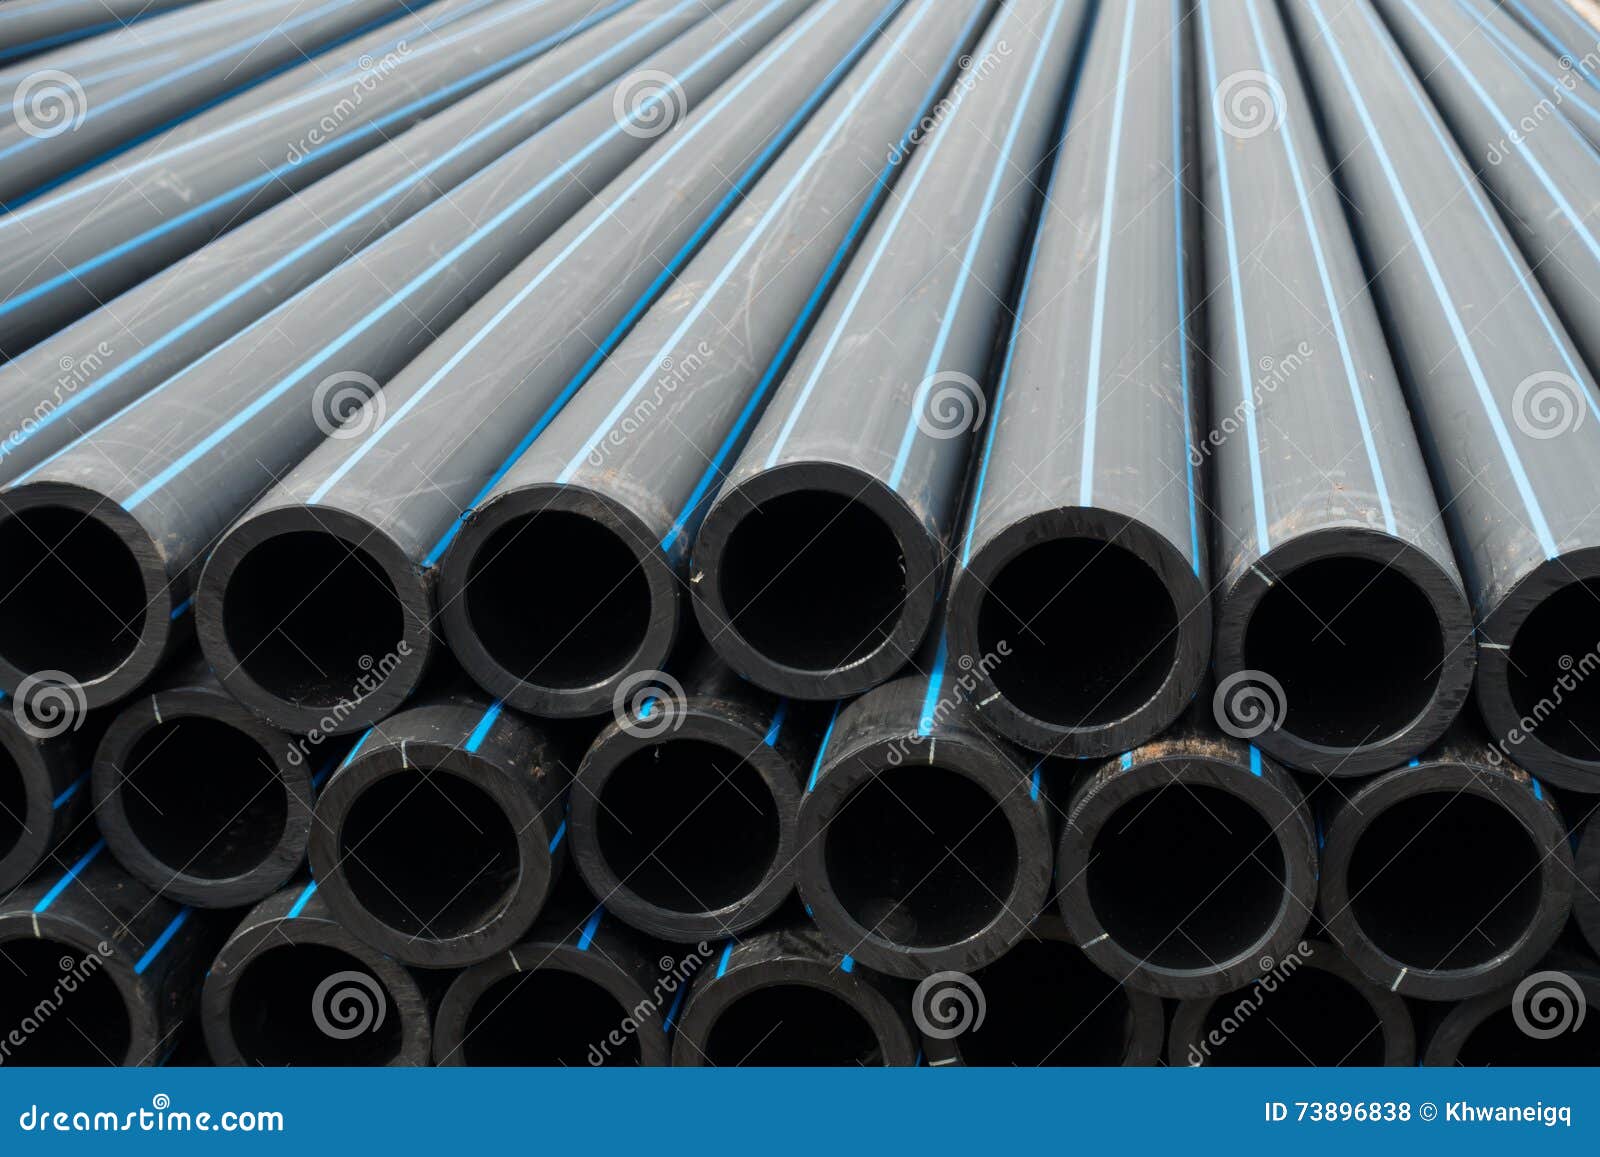 hdpe potable pipe, hdpe pipeline, storage of hdpe pipe, hdpe pip